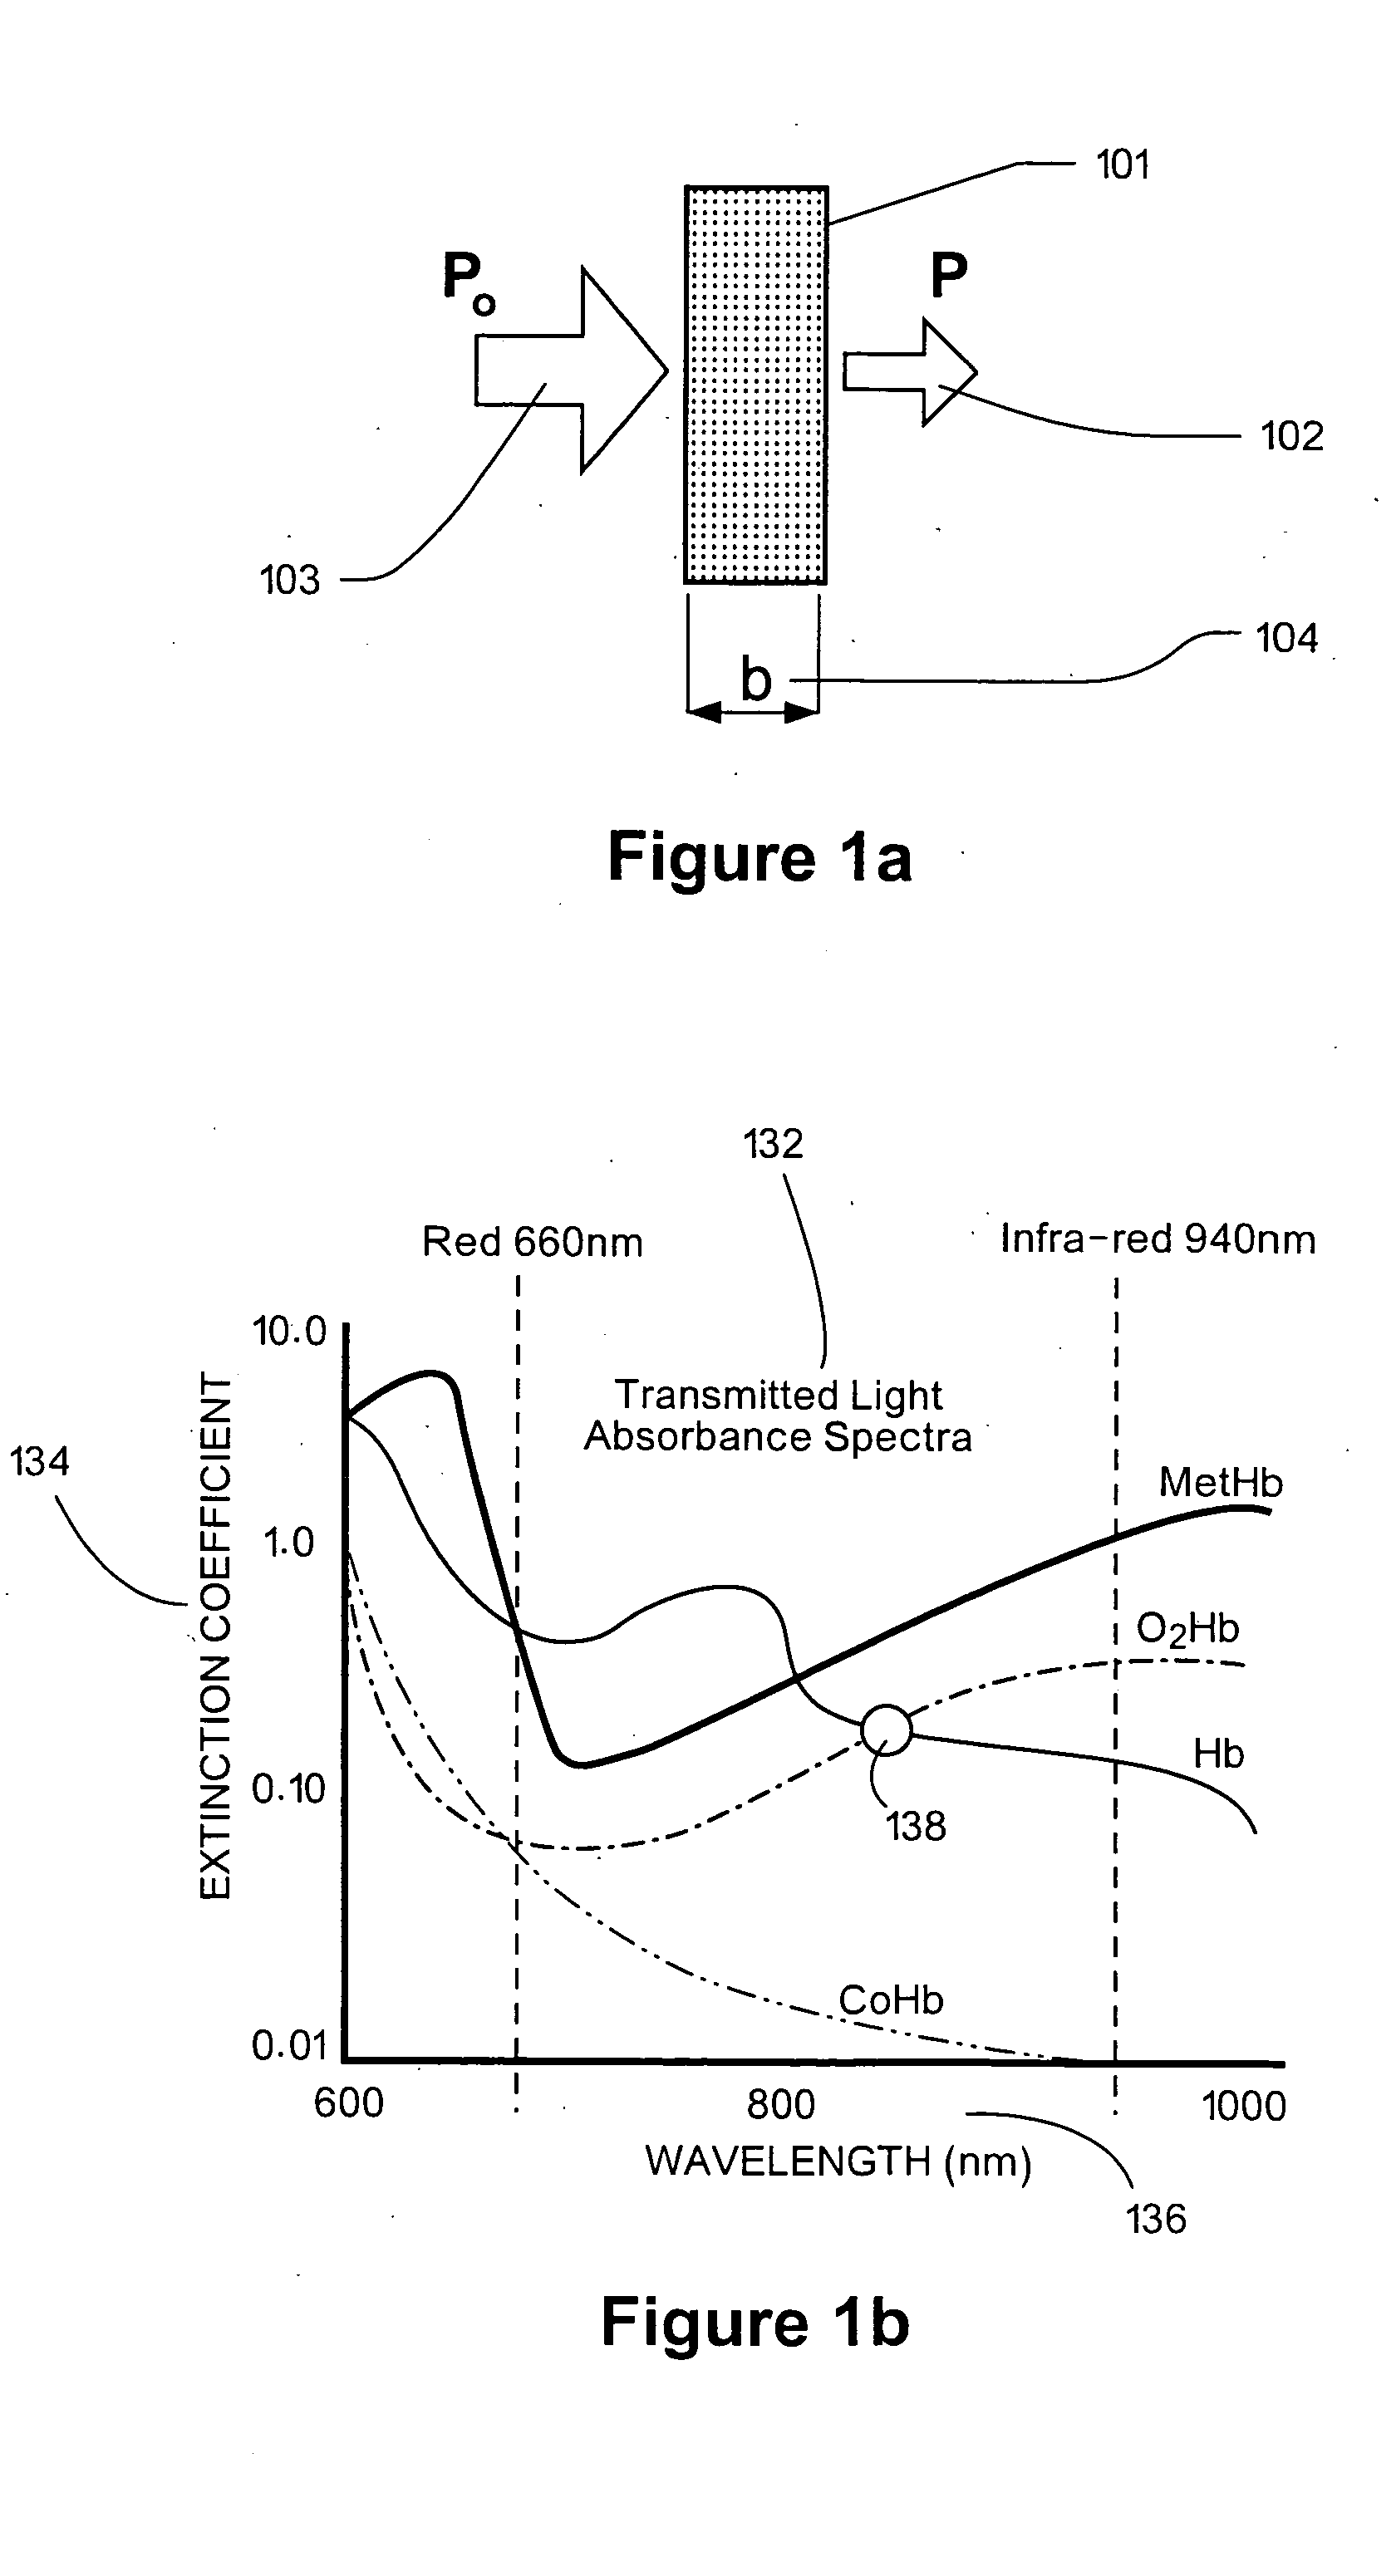 Cuvette apparatus and system for measuring optical properties of a liquid such as blood